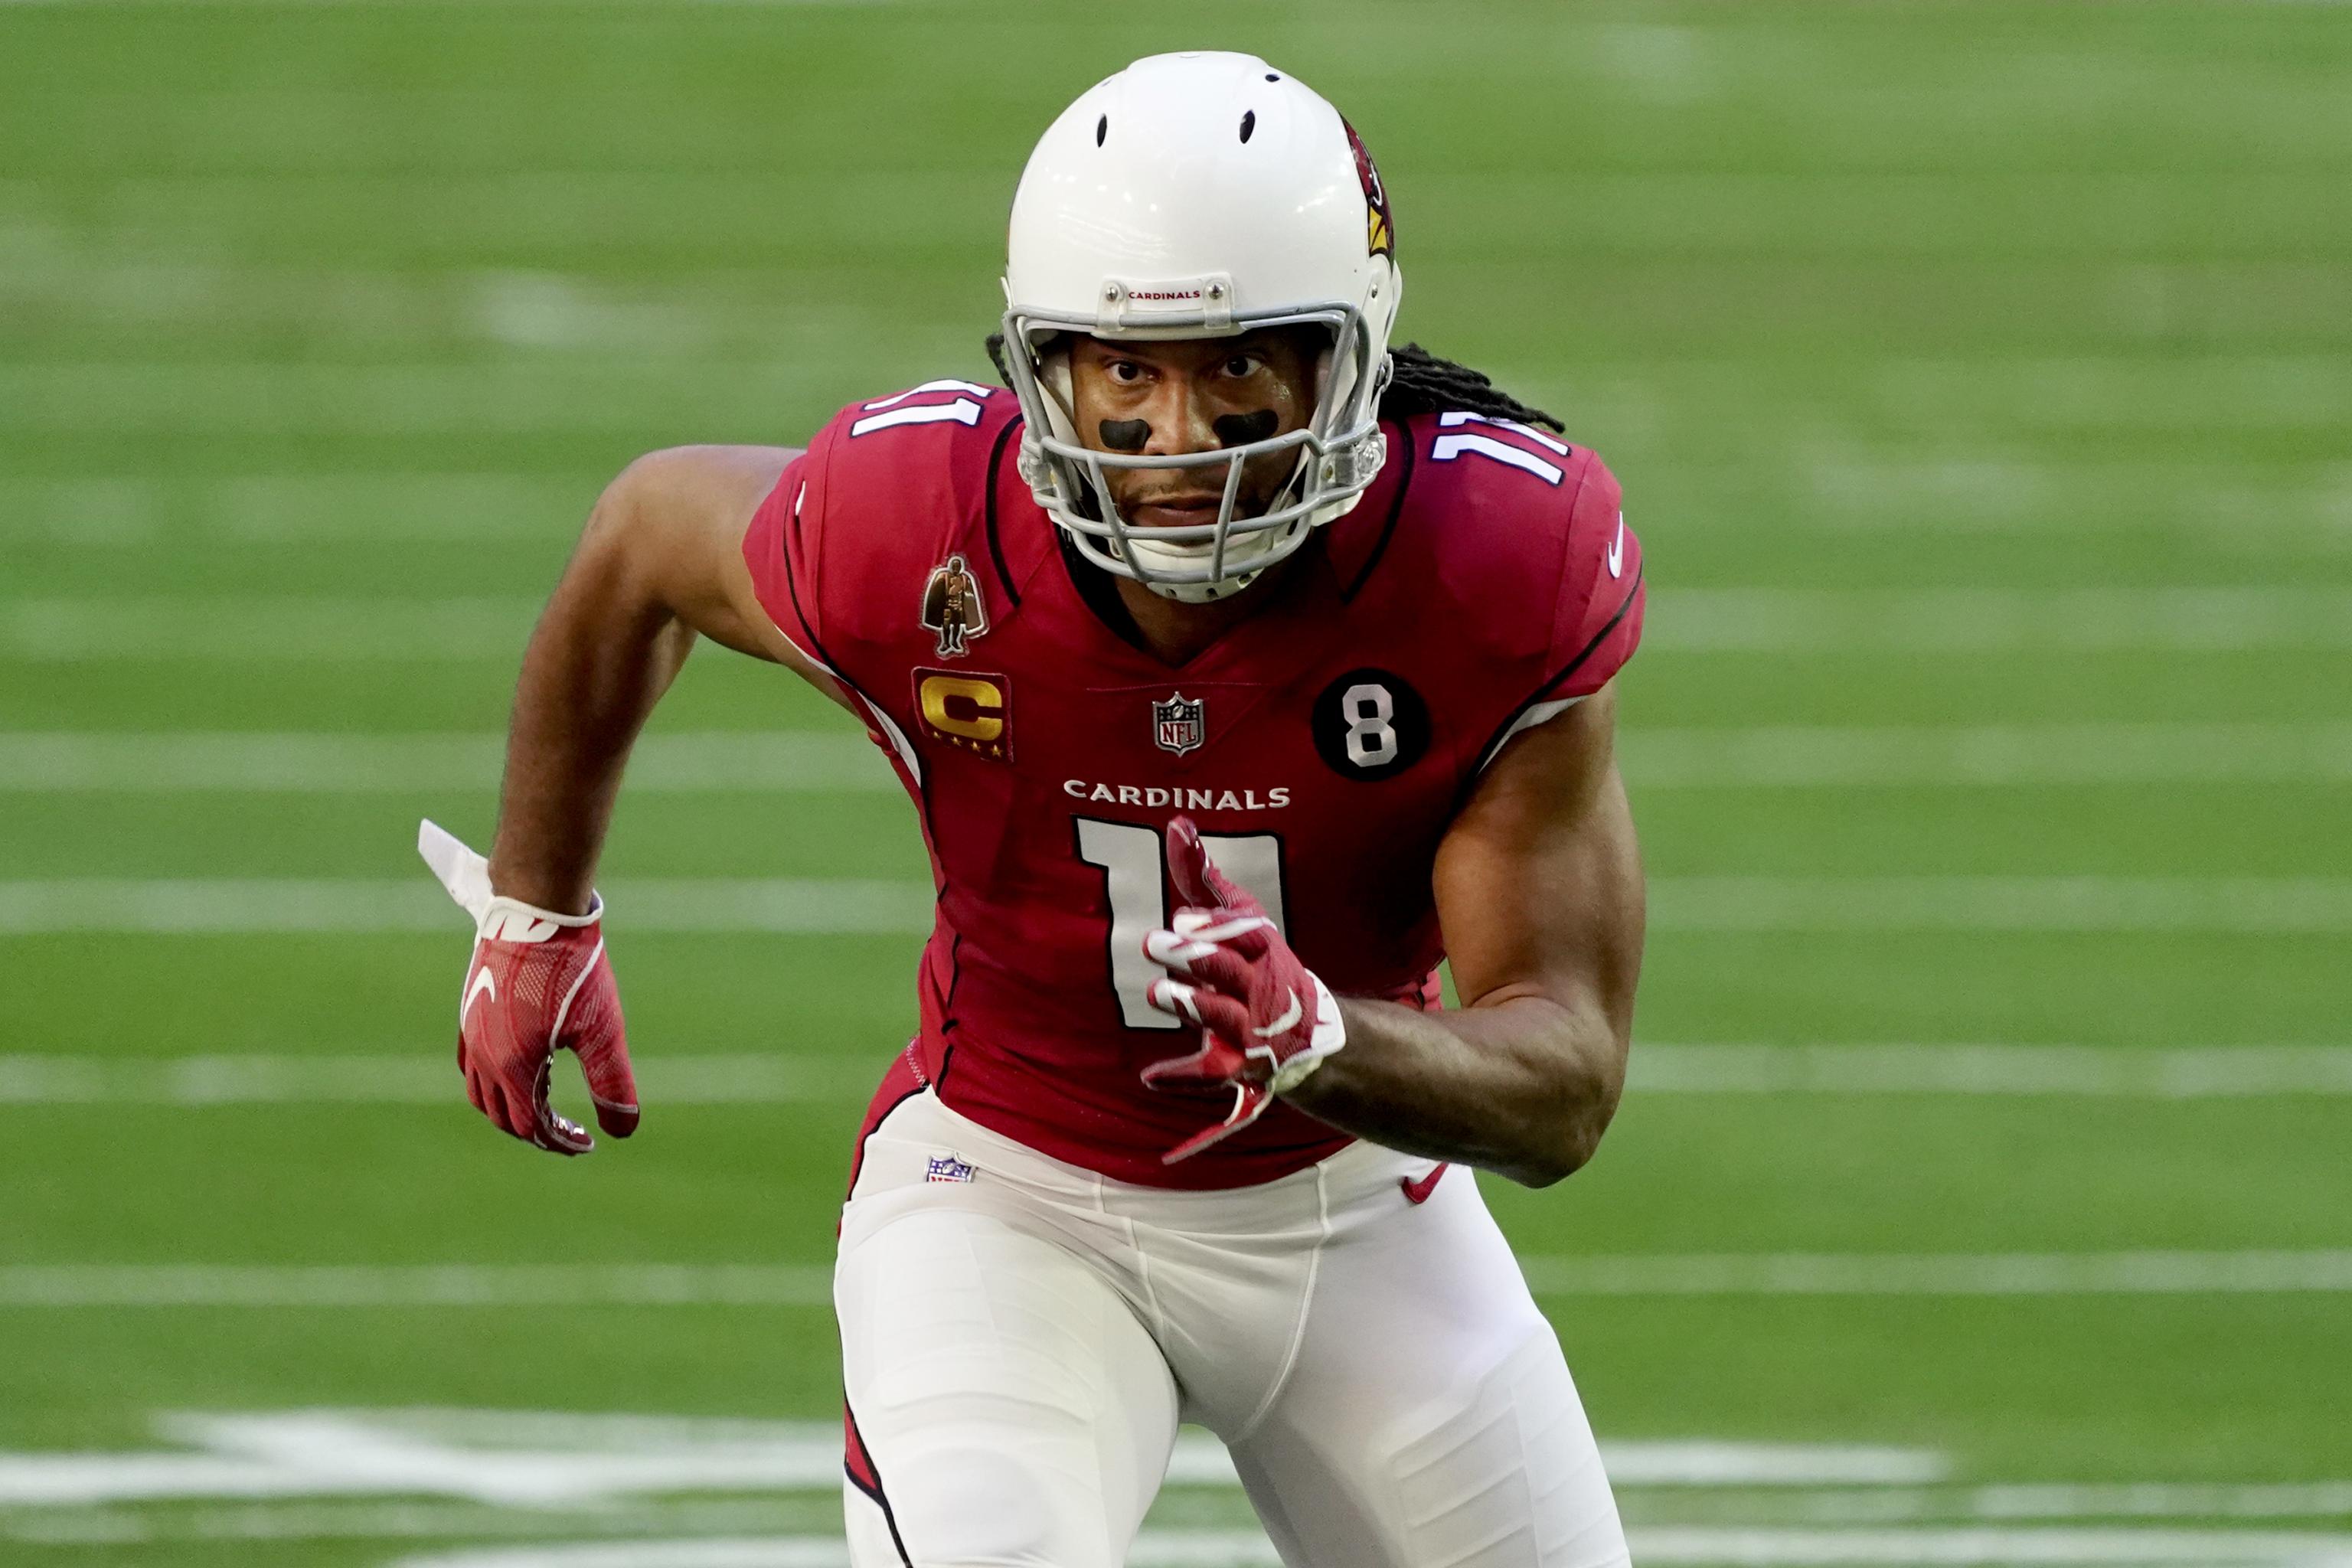 Larry Fitzgerald becomes youngest to gain 11,000 receiving yards - NBC  Sports